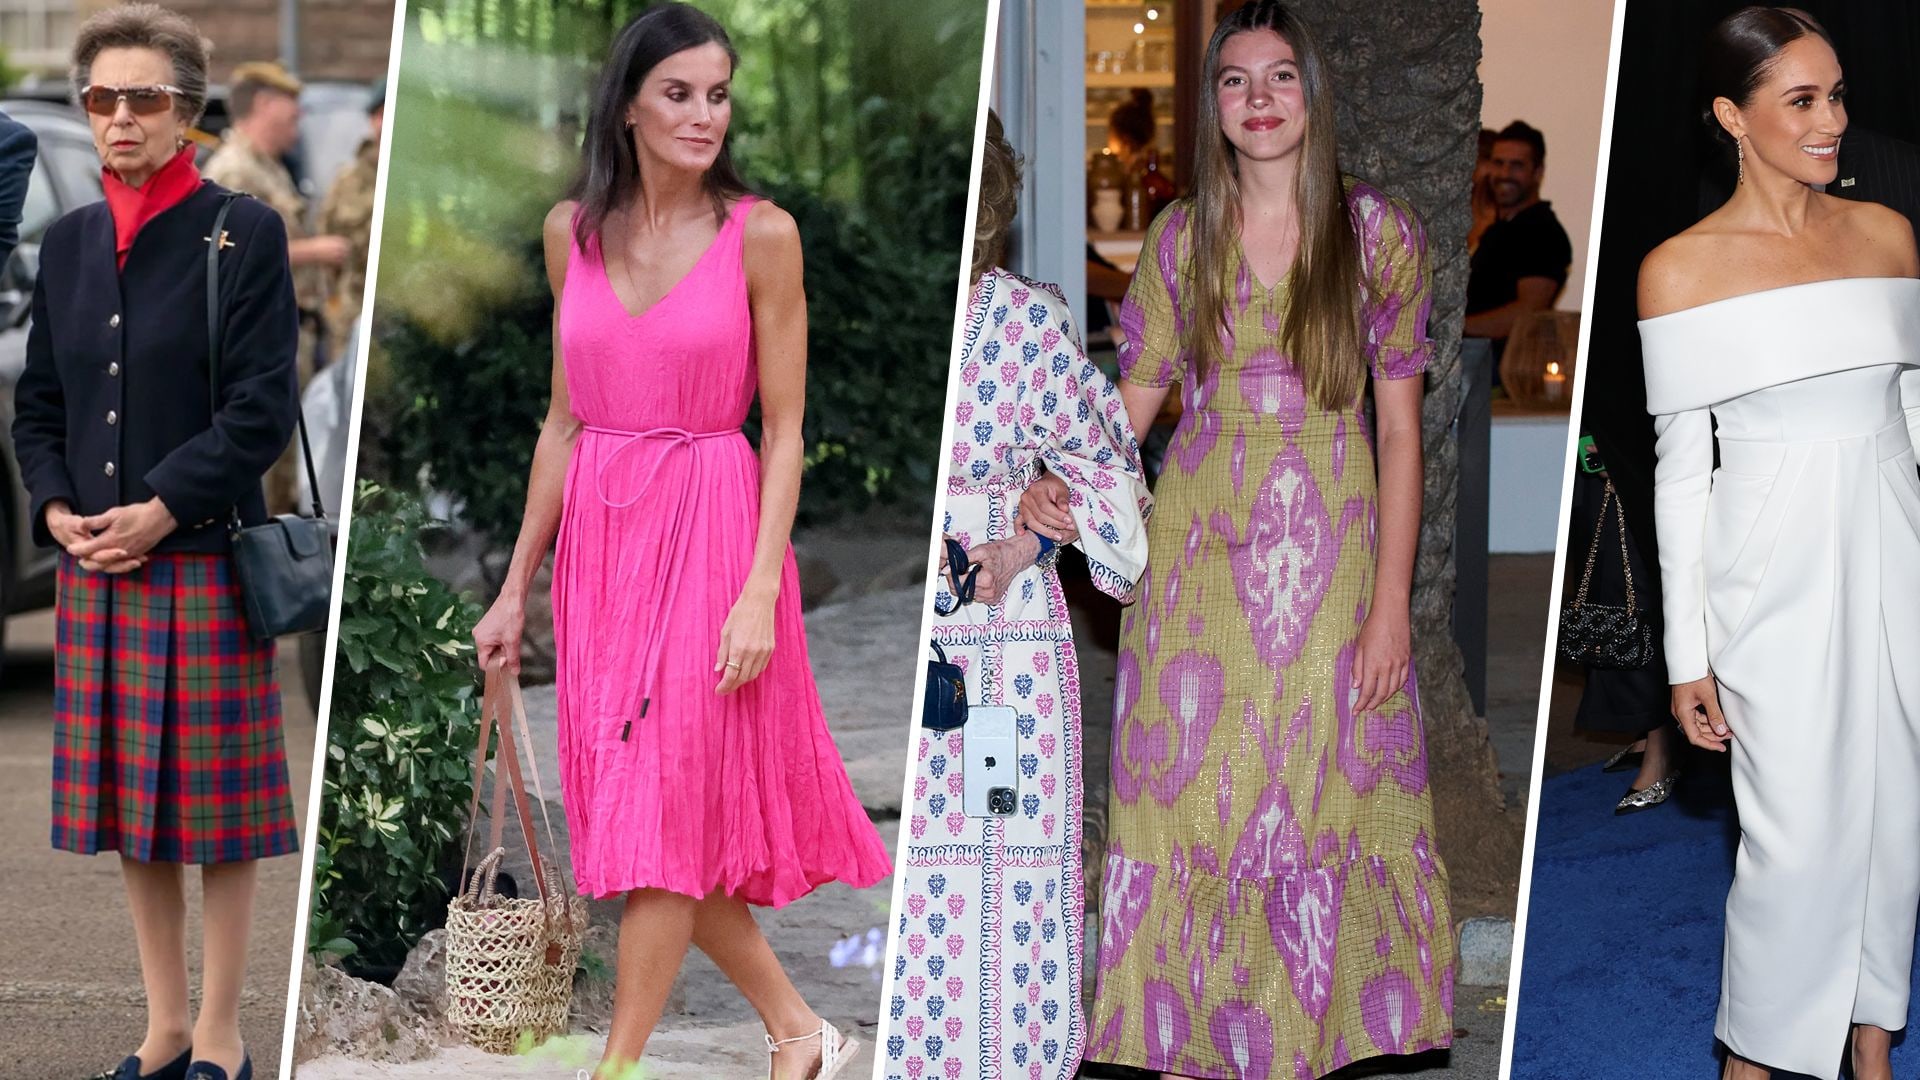 Queen Letizia's Style - Queen of Spain's Best Fashion Moments